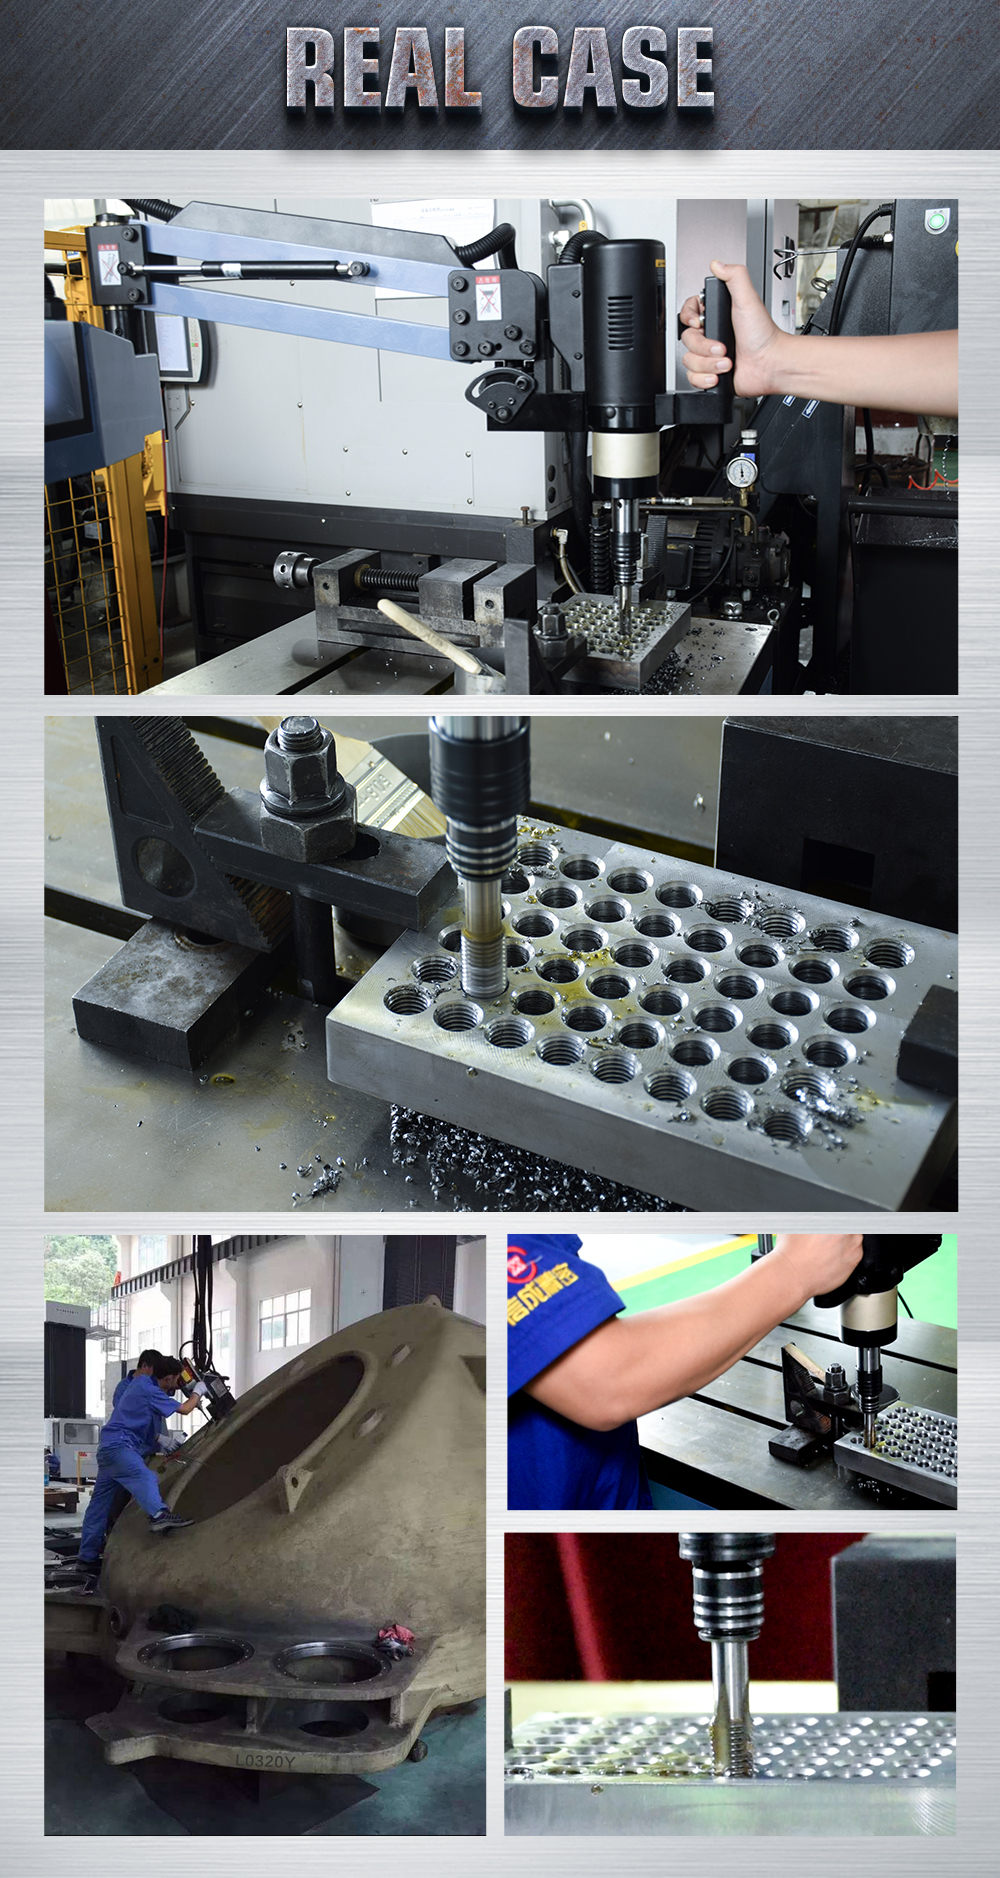 US Stock SFX-M24HR M4-M20 Electric Tapping Machine Electric Tapping Arm Universal Tapping Machine with TC820 ANSI Collets SFX-M24HR M4-M20 Electric Tapping Machine with TC820 ANSI Collets